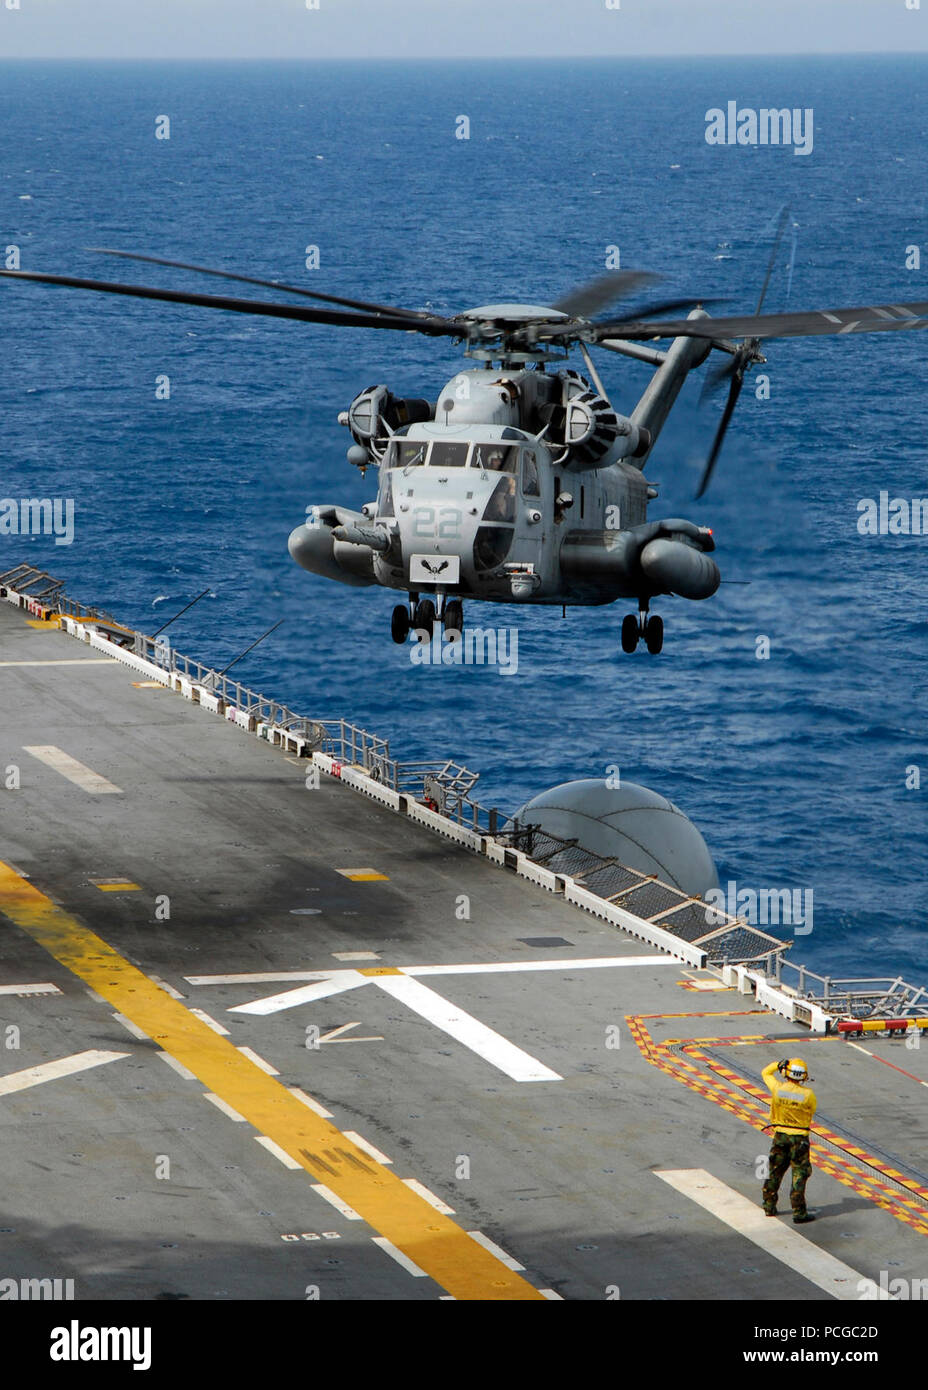 A CH-53E Super Stallion from Marine Medium Helicopter Squadron 264 lands on the flight deck of the multi-purpose amphibious assault ship USS Iwo Jima. Iwo Jima, the flagship of the Iwo Jima Expeditionary Strike Group, is on a scheduled deployment en route to the U.S. 5th and 6th Fleet areas of responsibility supporting maritime security operations. Stock Photo